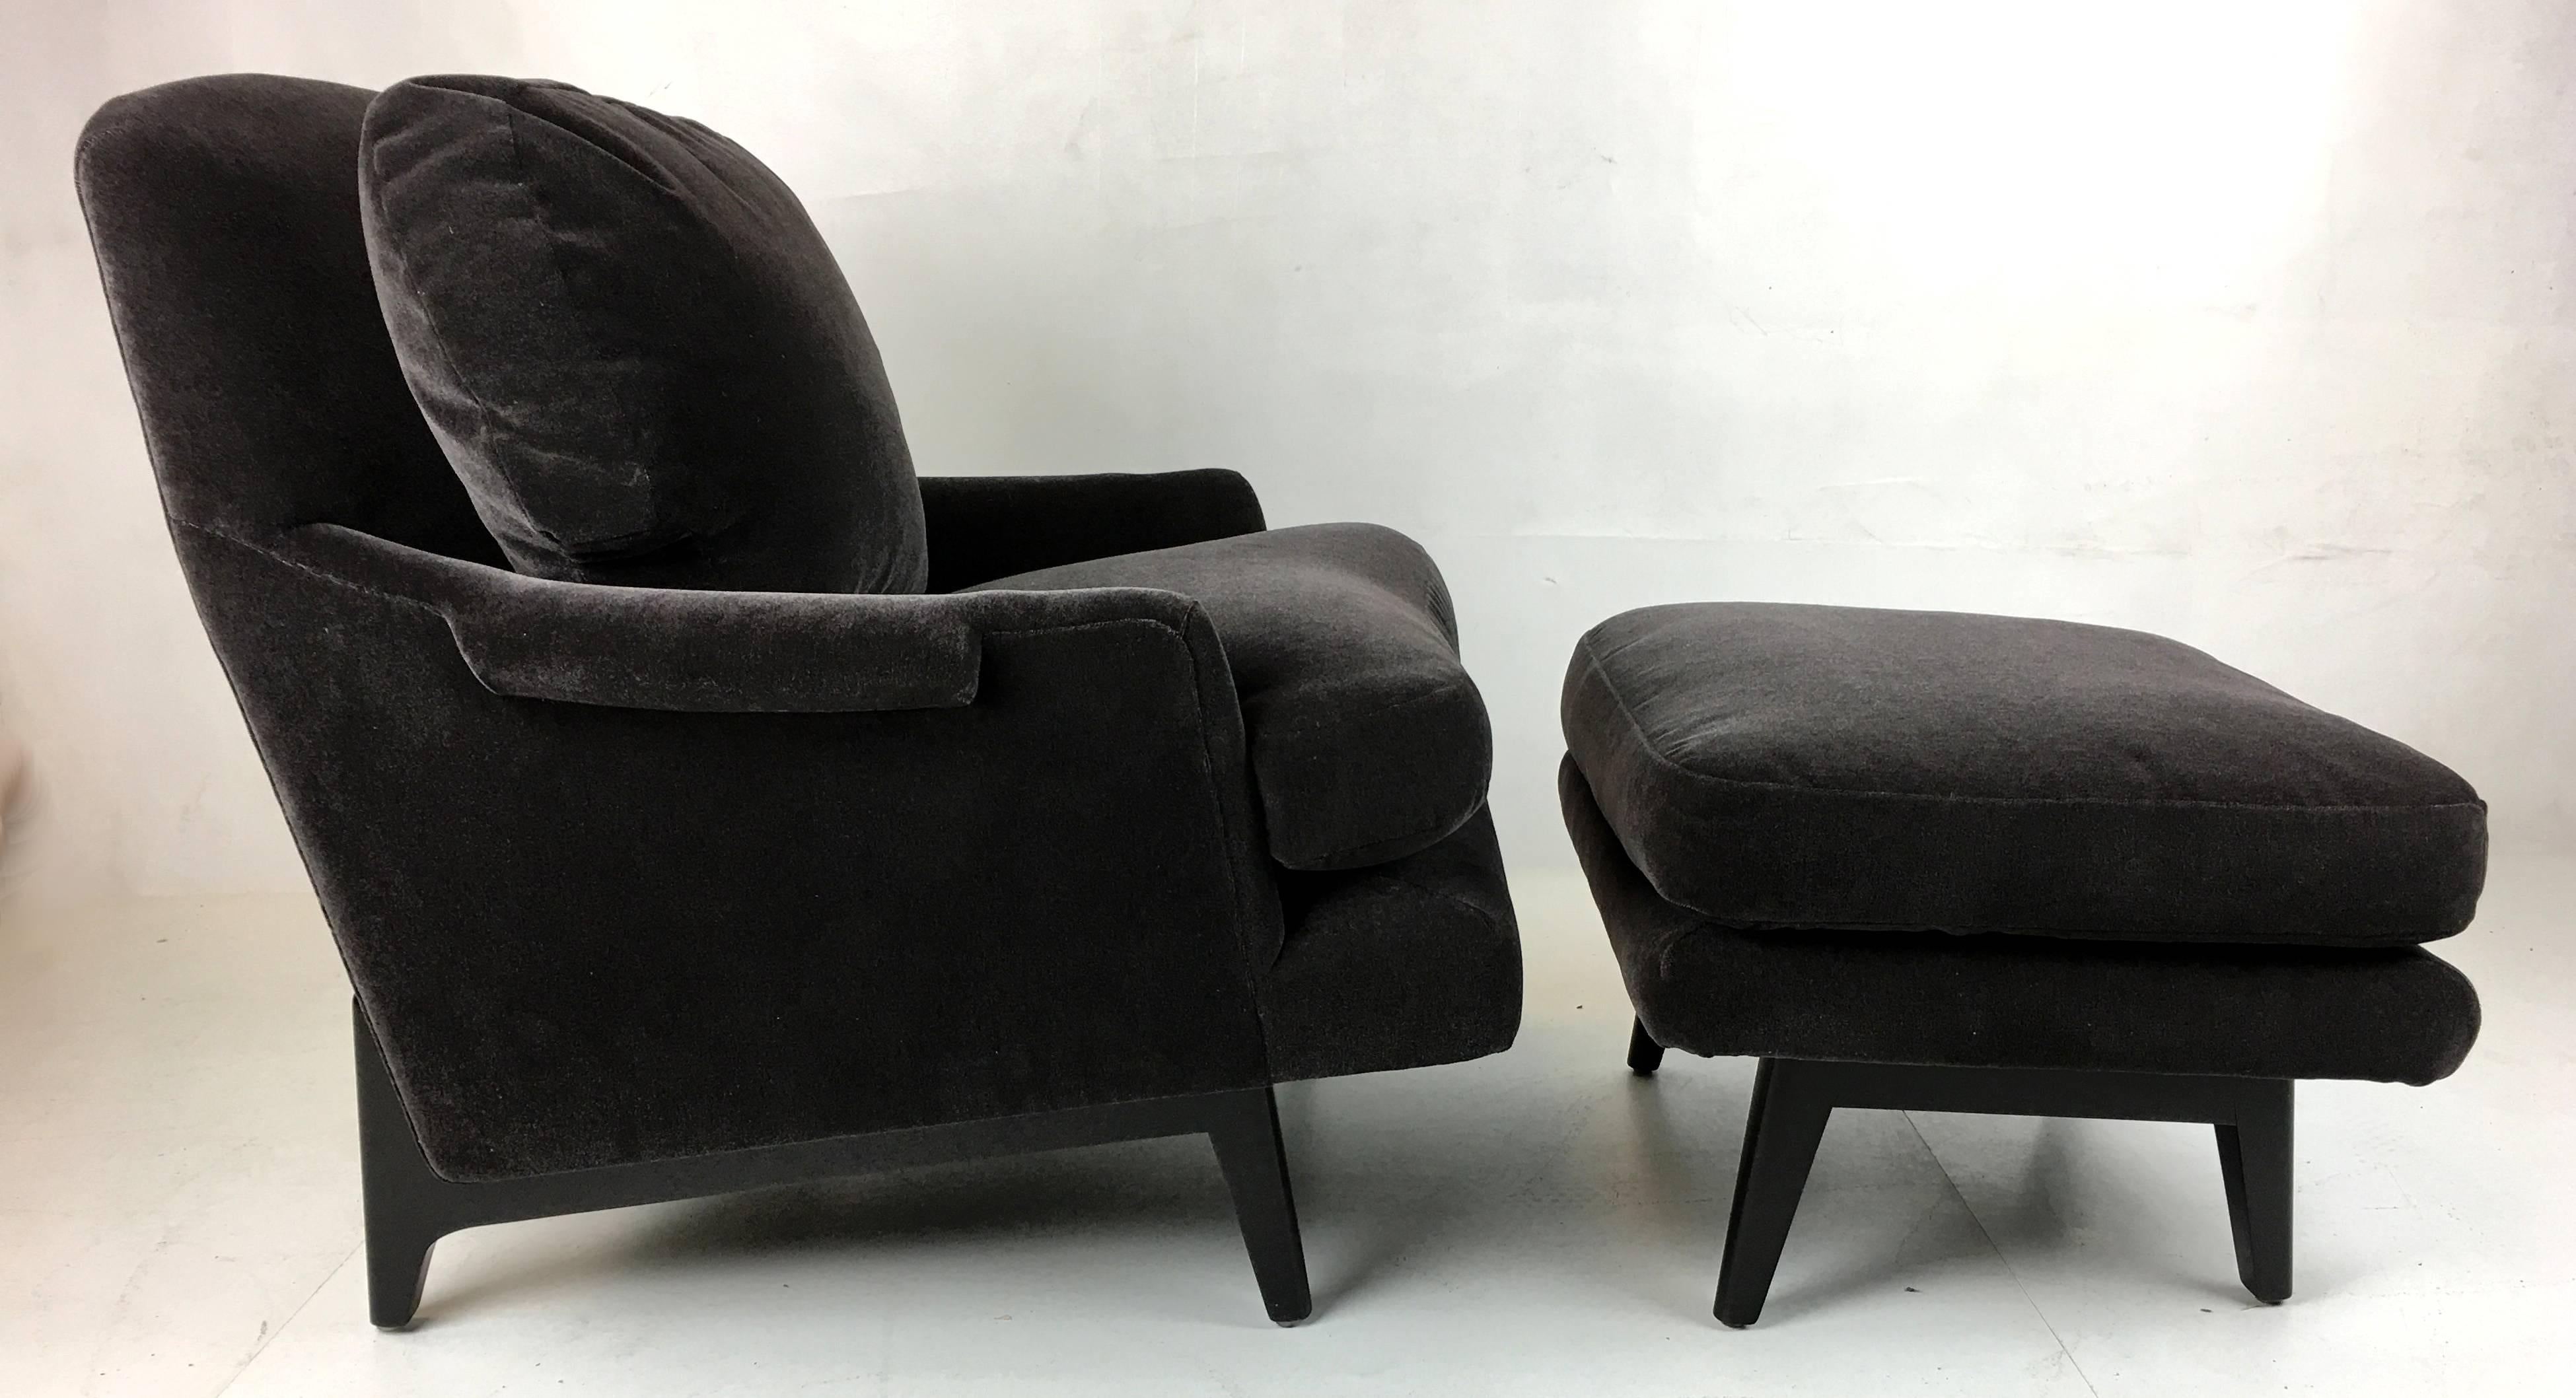 Handsome modern lounge chair and ottoman with exposed mahogany base by Dunbar. This chair has perfect ergonomics and is as comfortable as can be....lounge on.